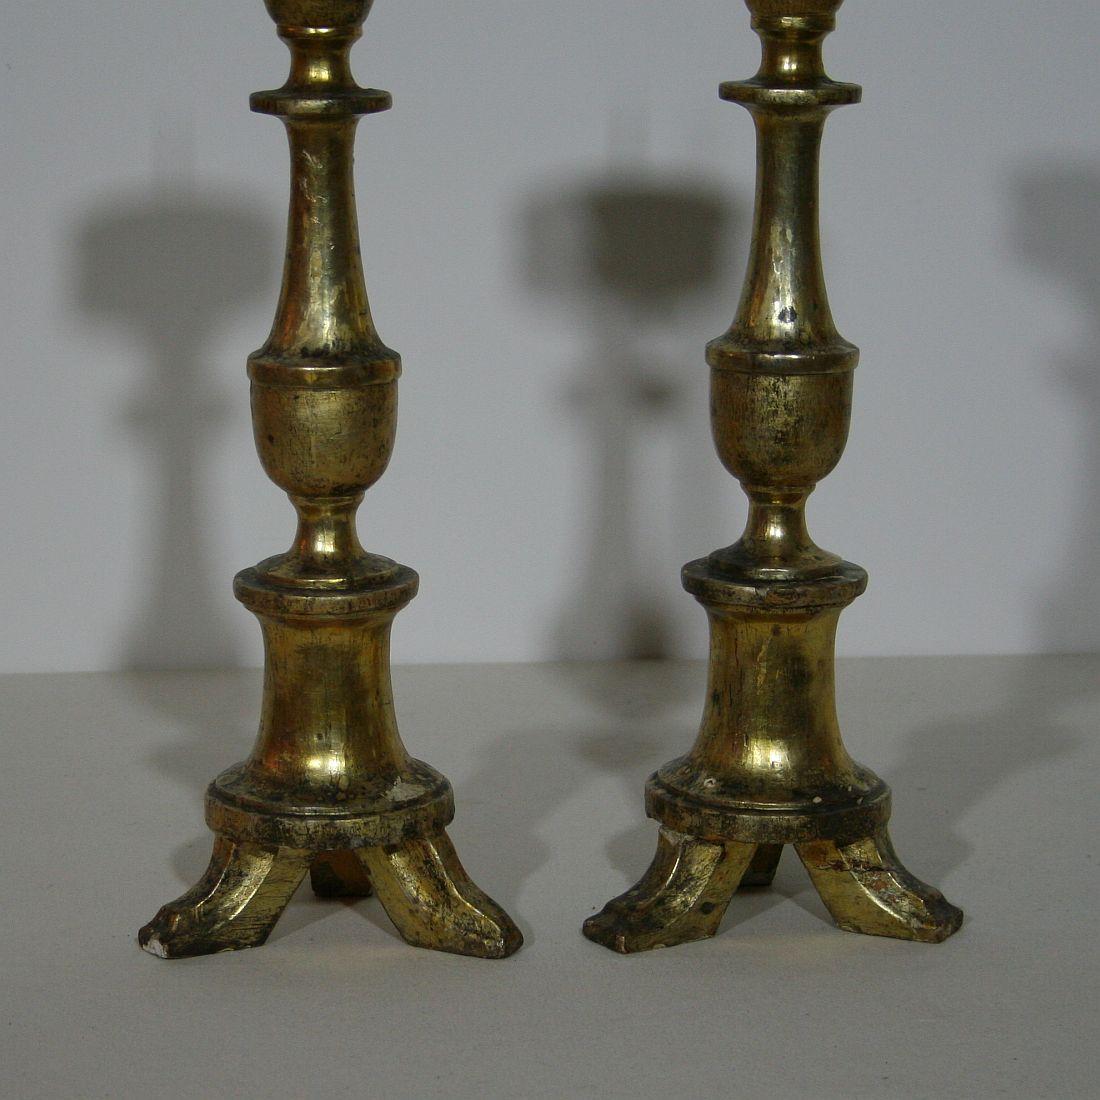 Pair of Late 18th-19th Century Italian Giltwood Candlesticks/ Candleholders 2